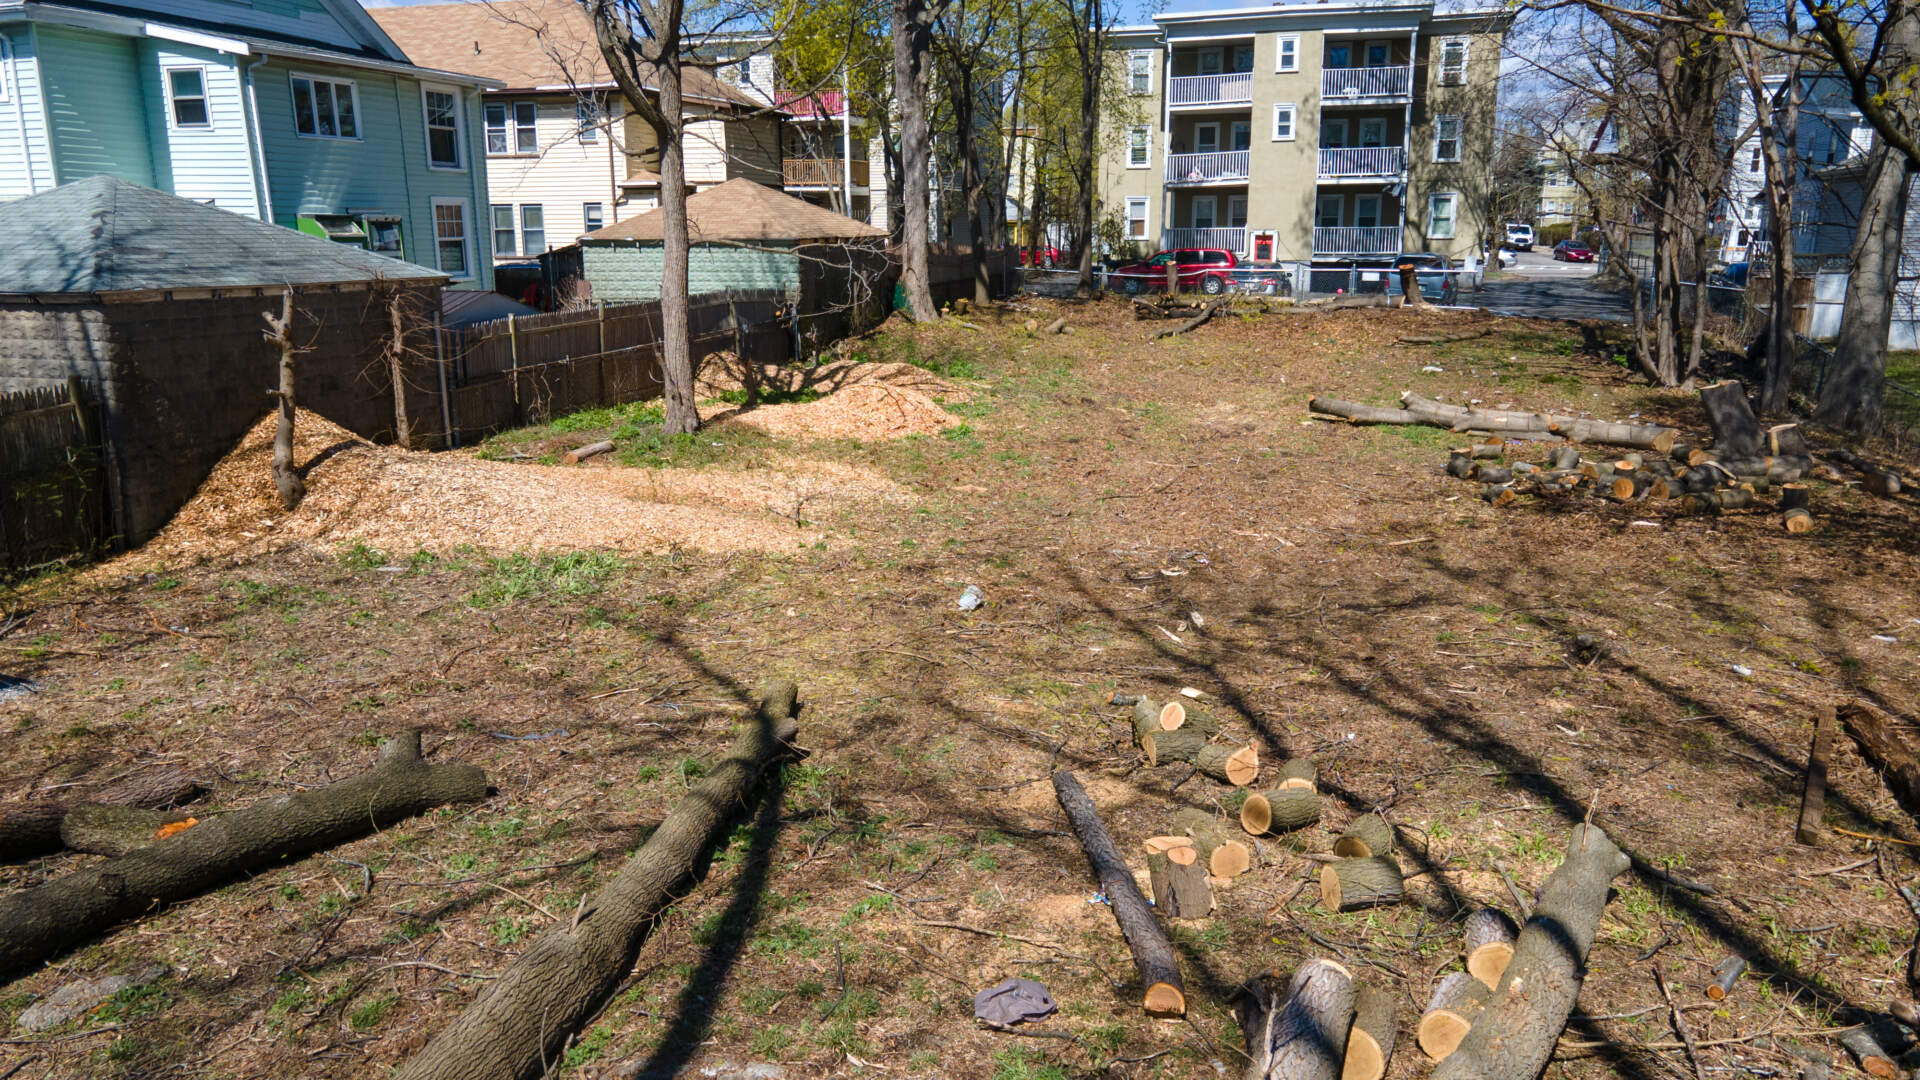 The vacant lot in Mattapan that became the Edgewater Food Forest. Courtesy Hope Kelley, Boston Food Forest Coalition